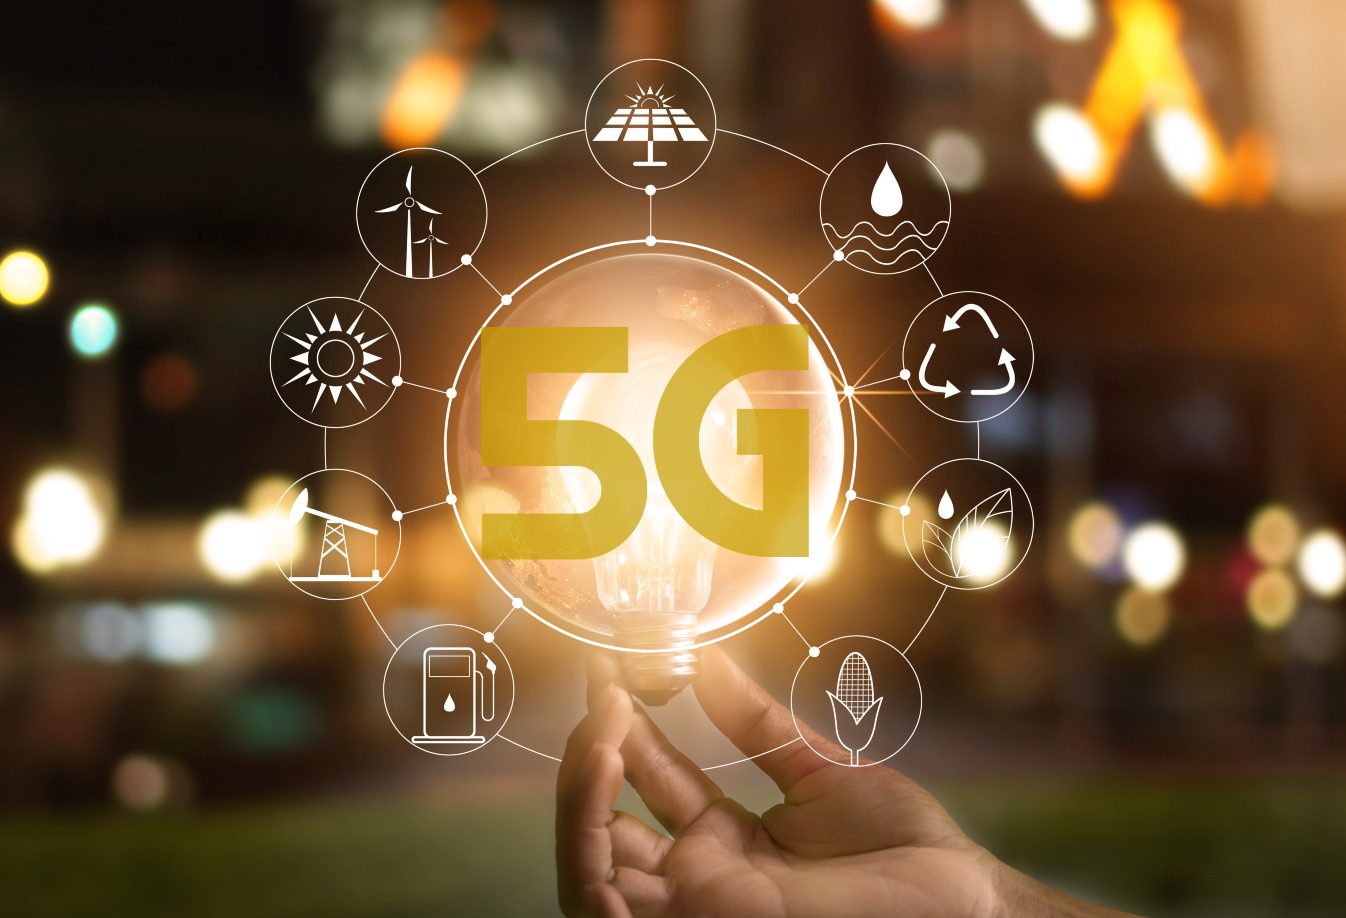 UK enterprises look to 5G to alleviate Covid-19 business pressures: EY